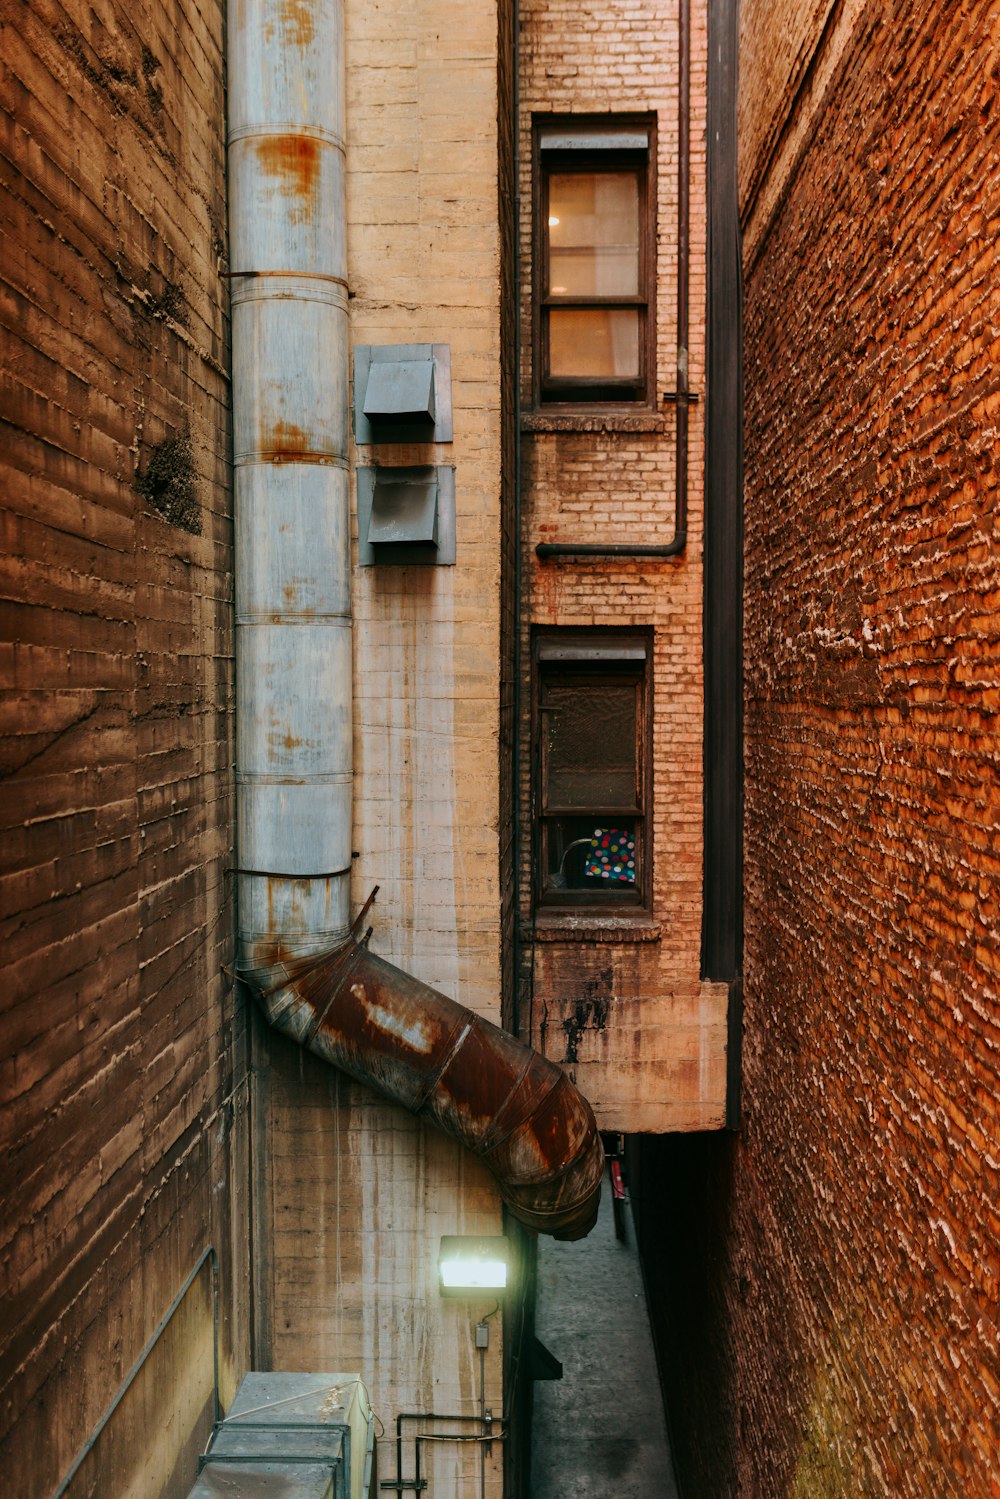 a narrow alley way with a rusted metal pipe